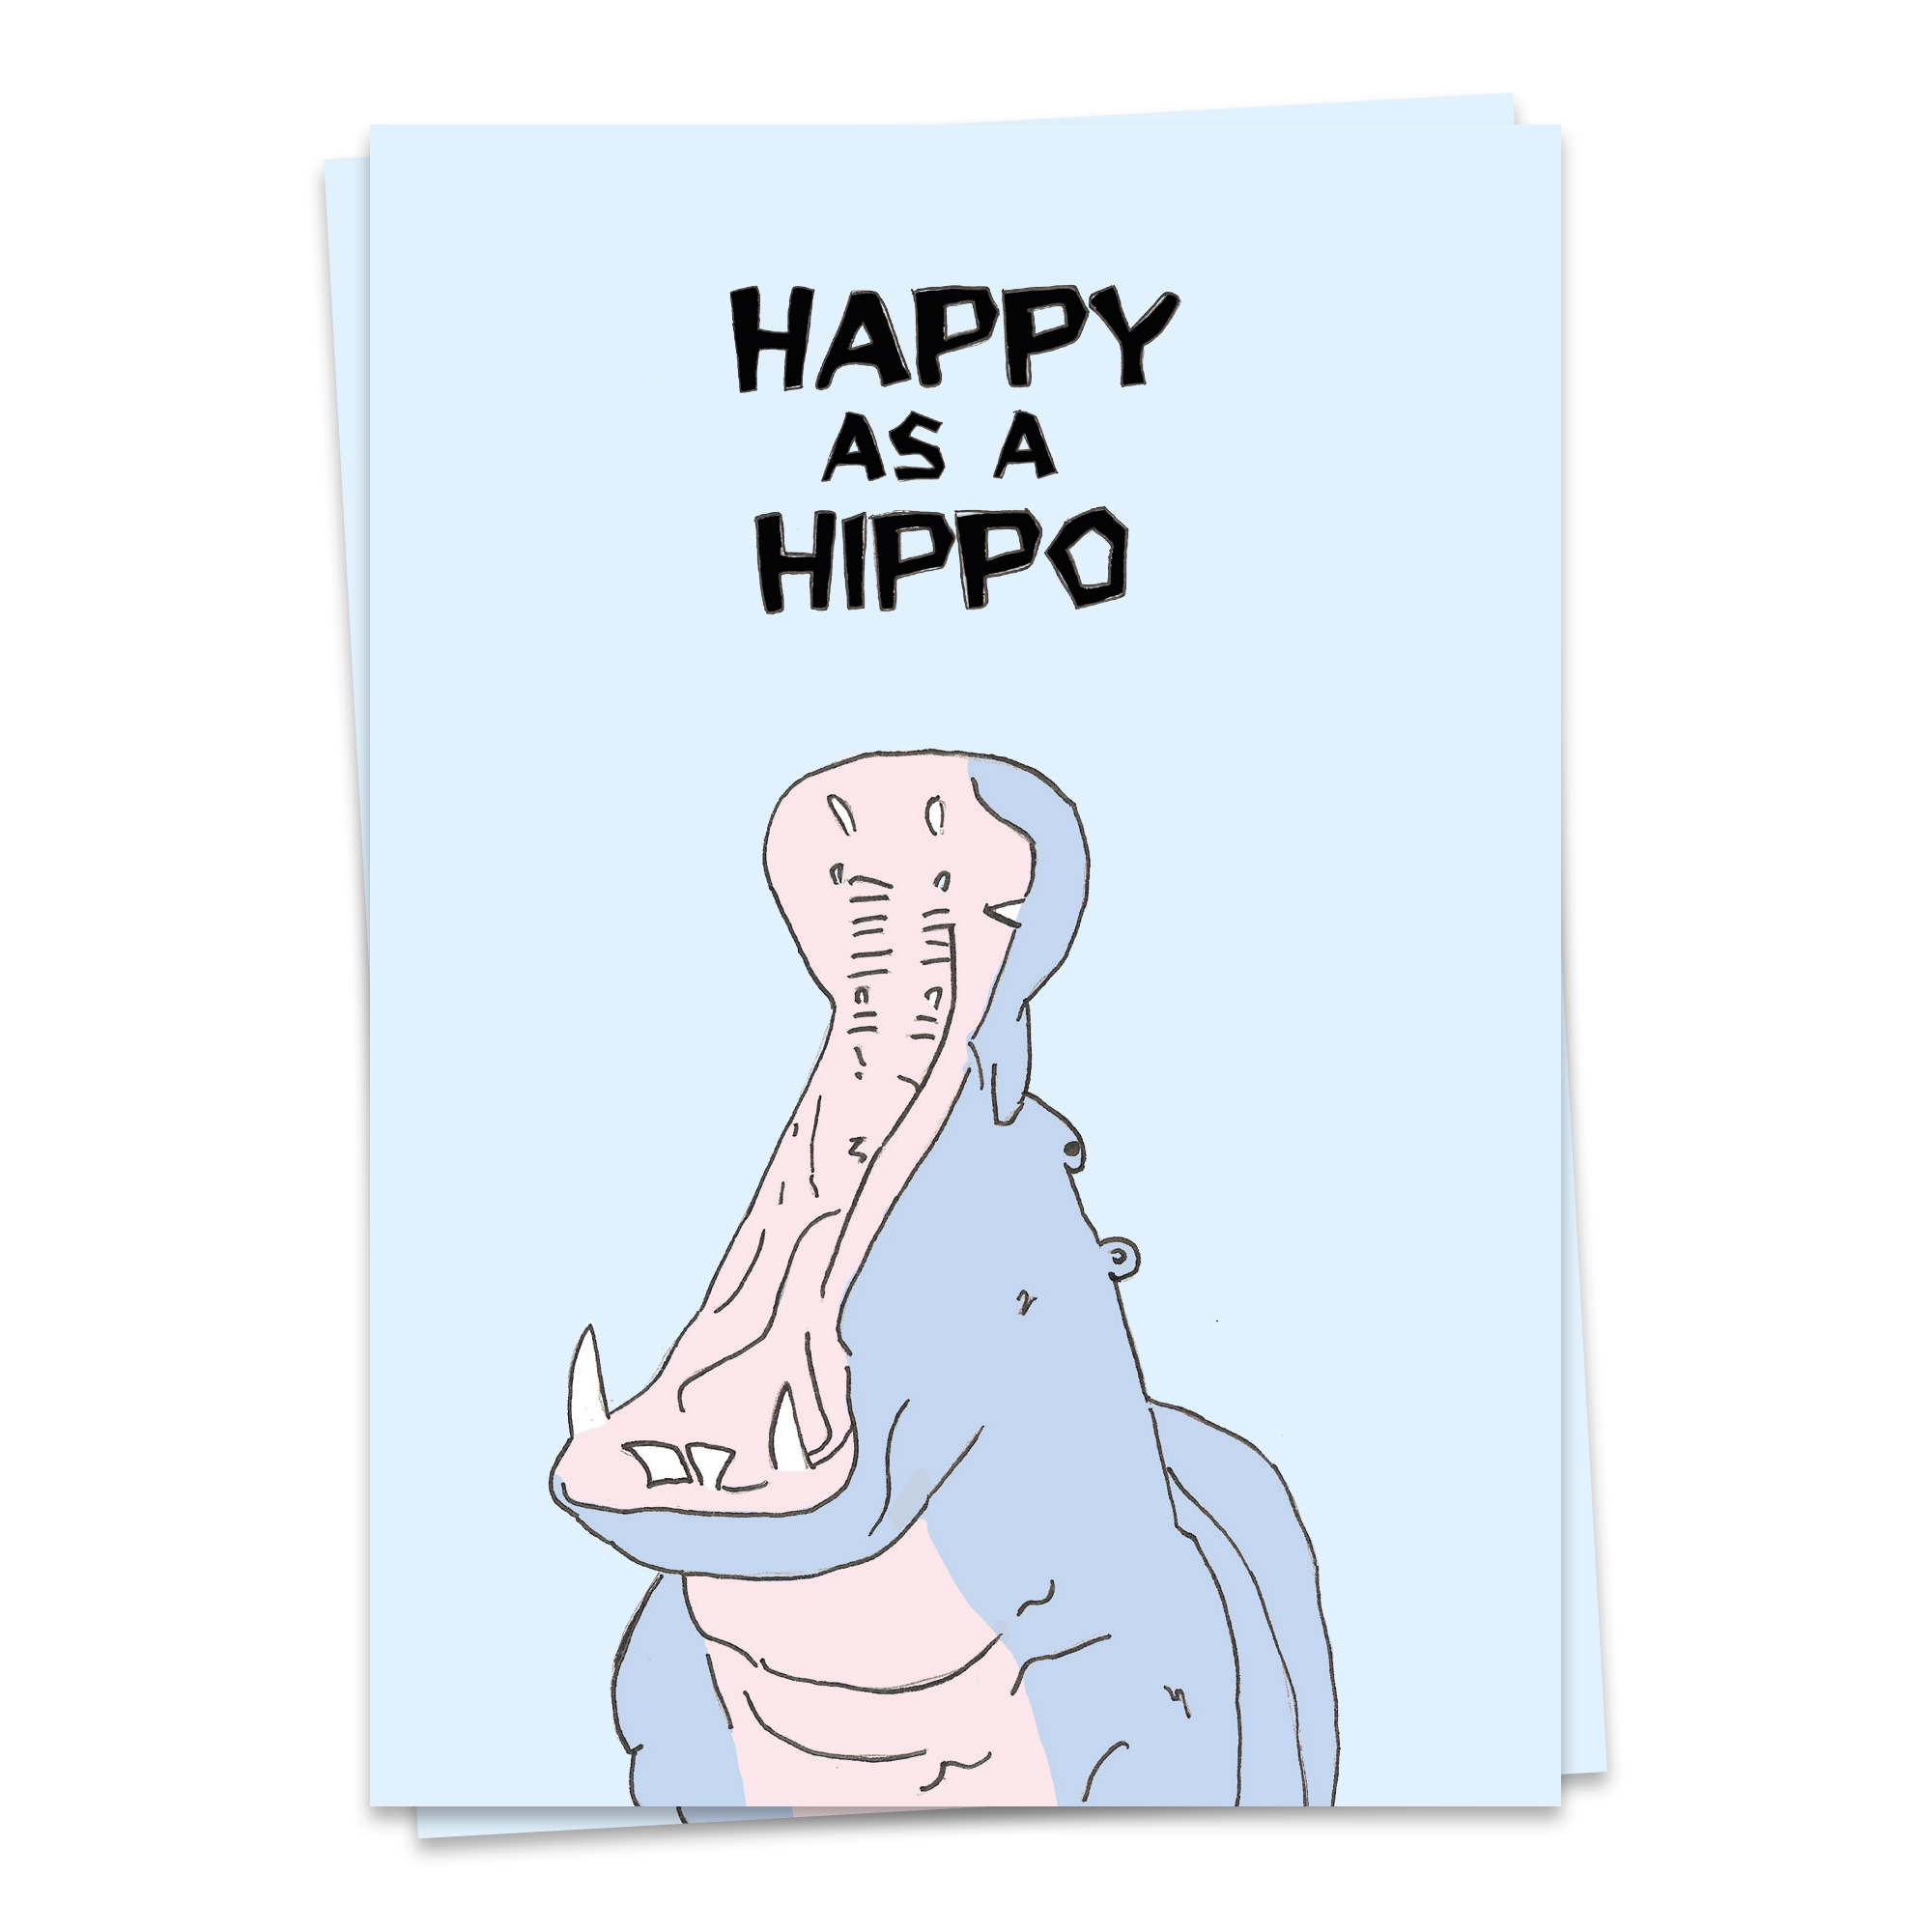 Cardimals - happy as a hippo